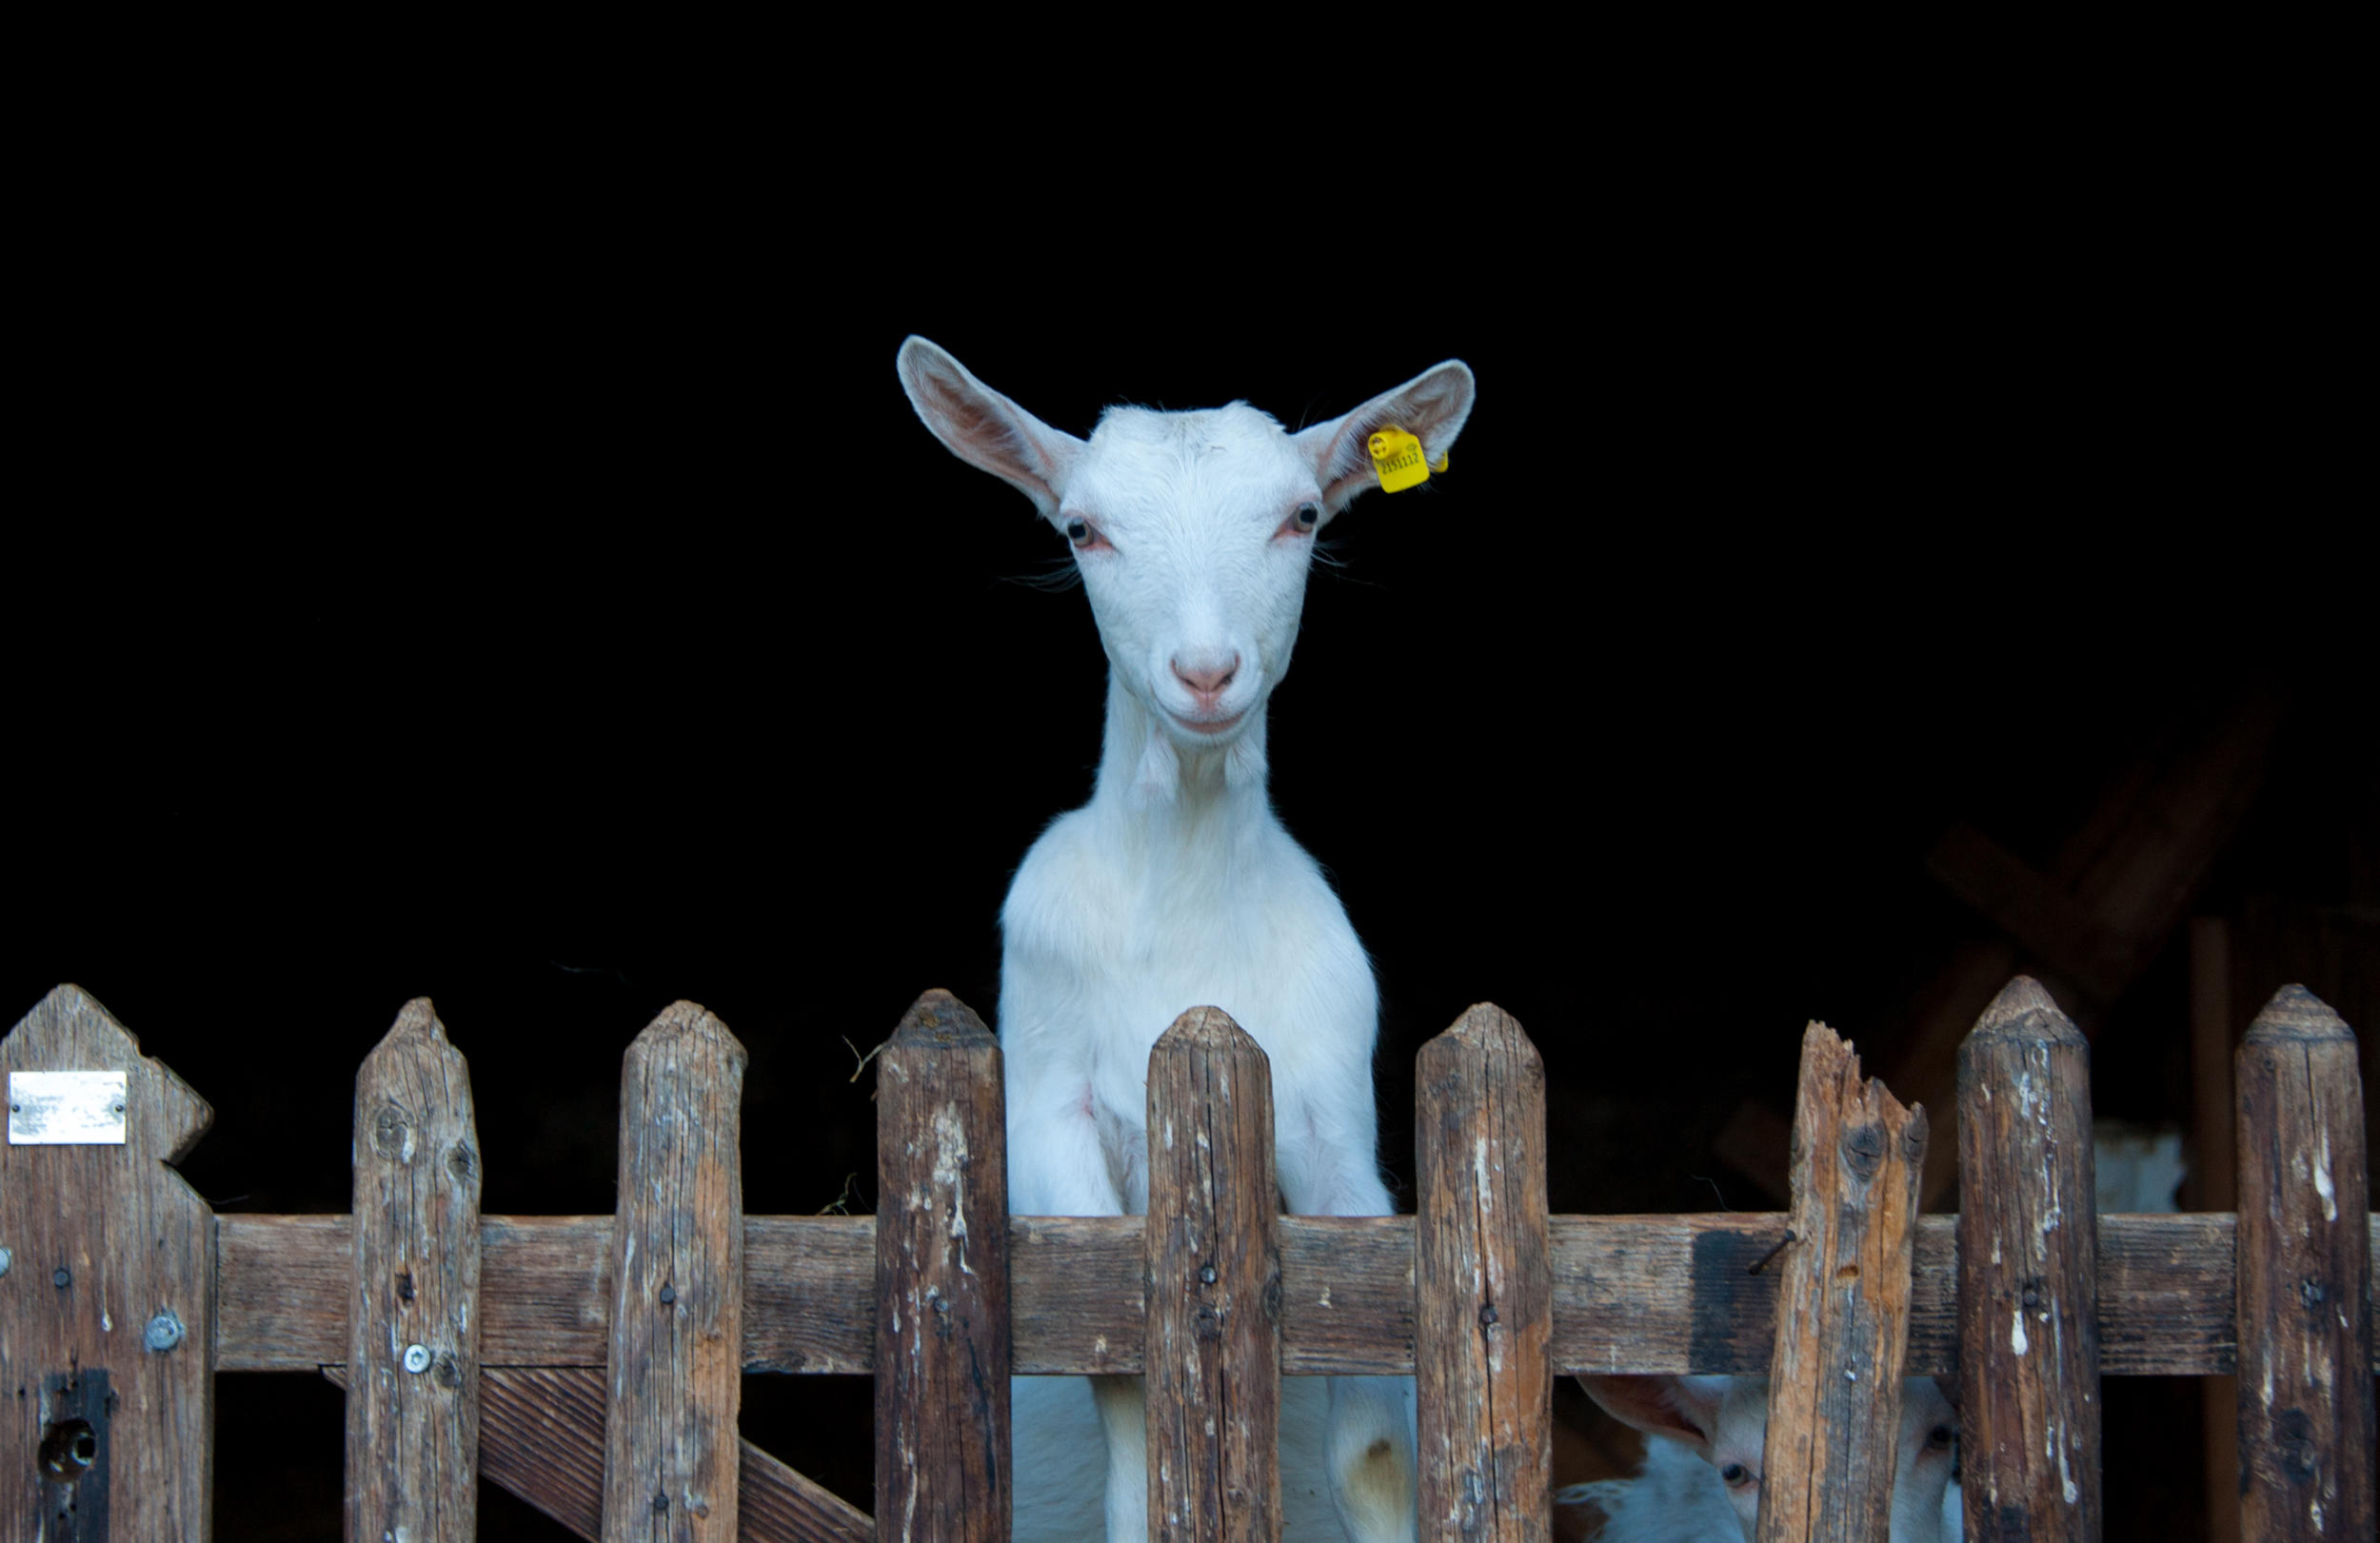 Appenzell goat looking over a fence